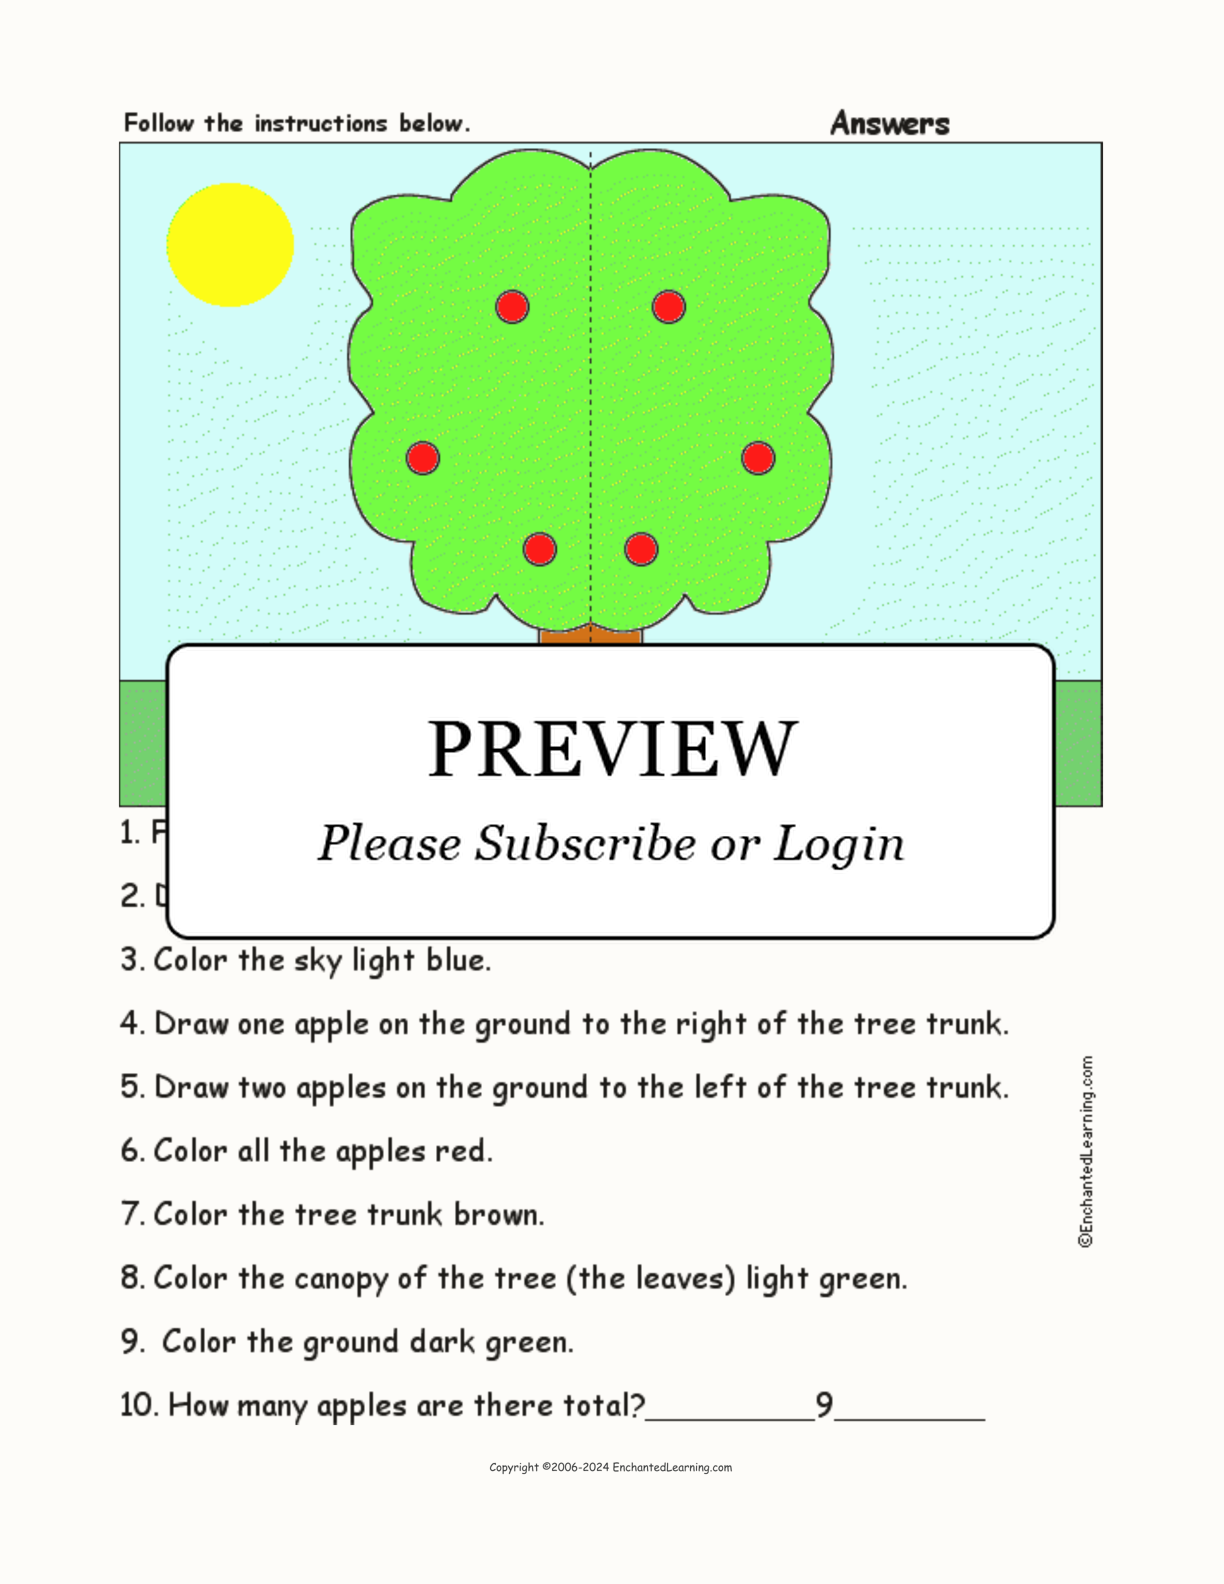 Apple Tree - Follow the Instructions interactive worksheet page 2